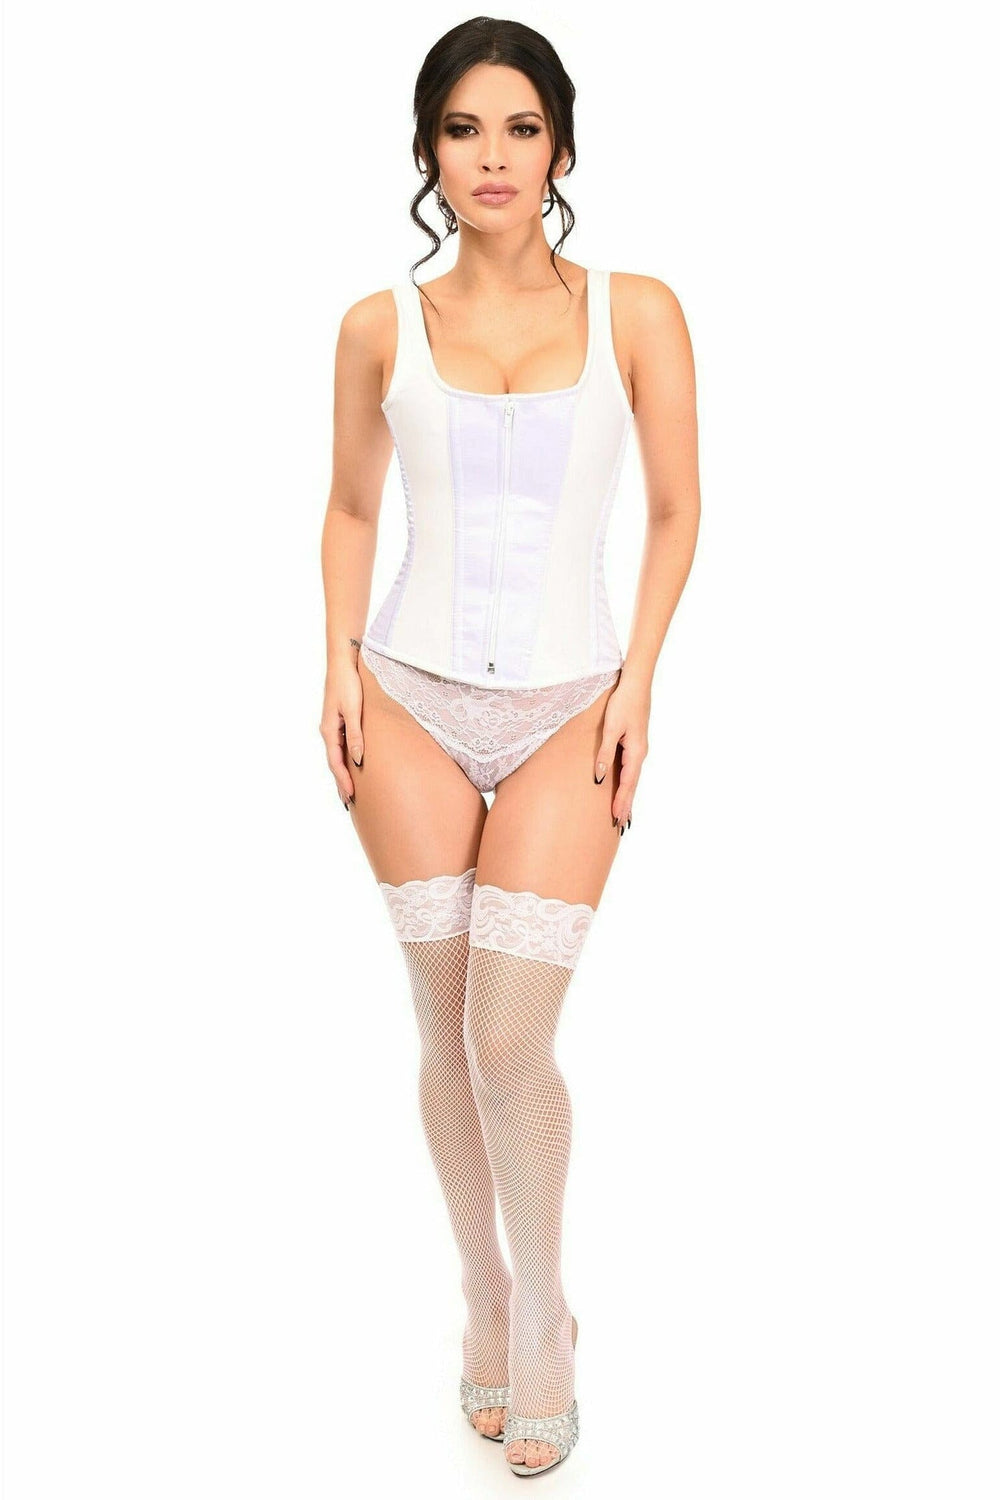 Top Drawer White Satin Steel Boned Corset w/Straps-Steel Boned Overbust-Daisy Corsets-SEXYSHOES.COM